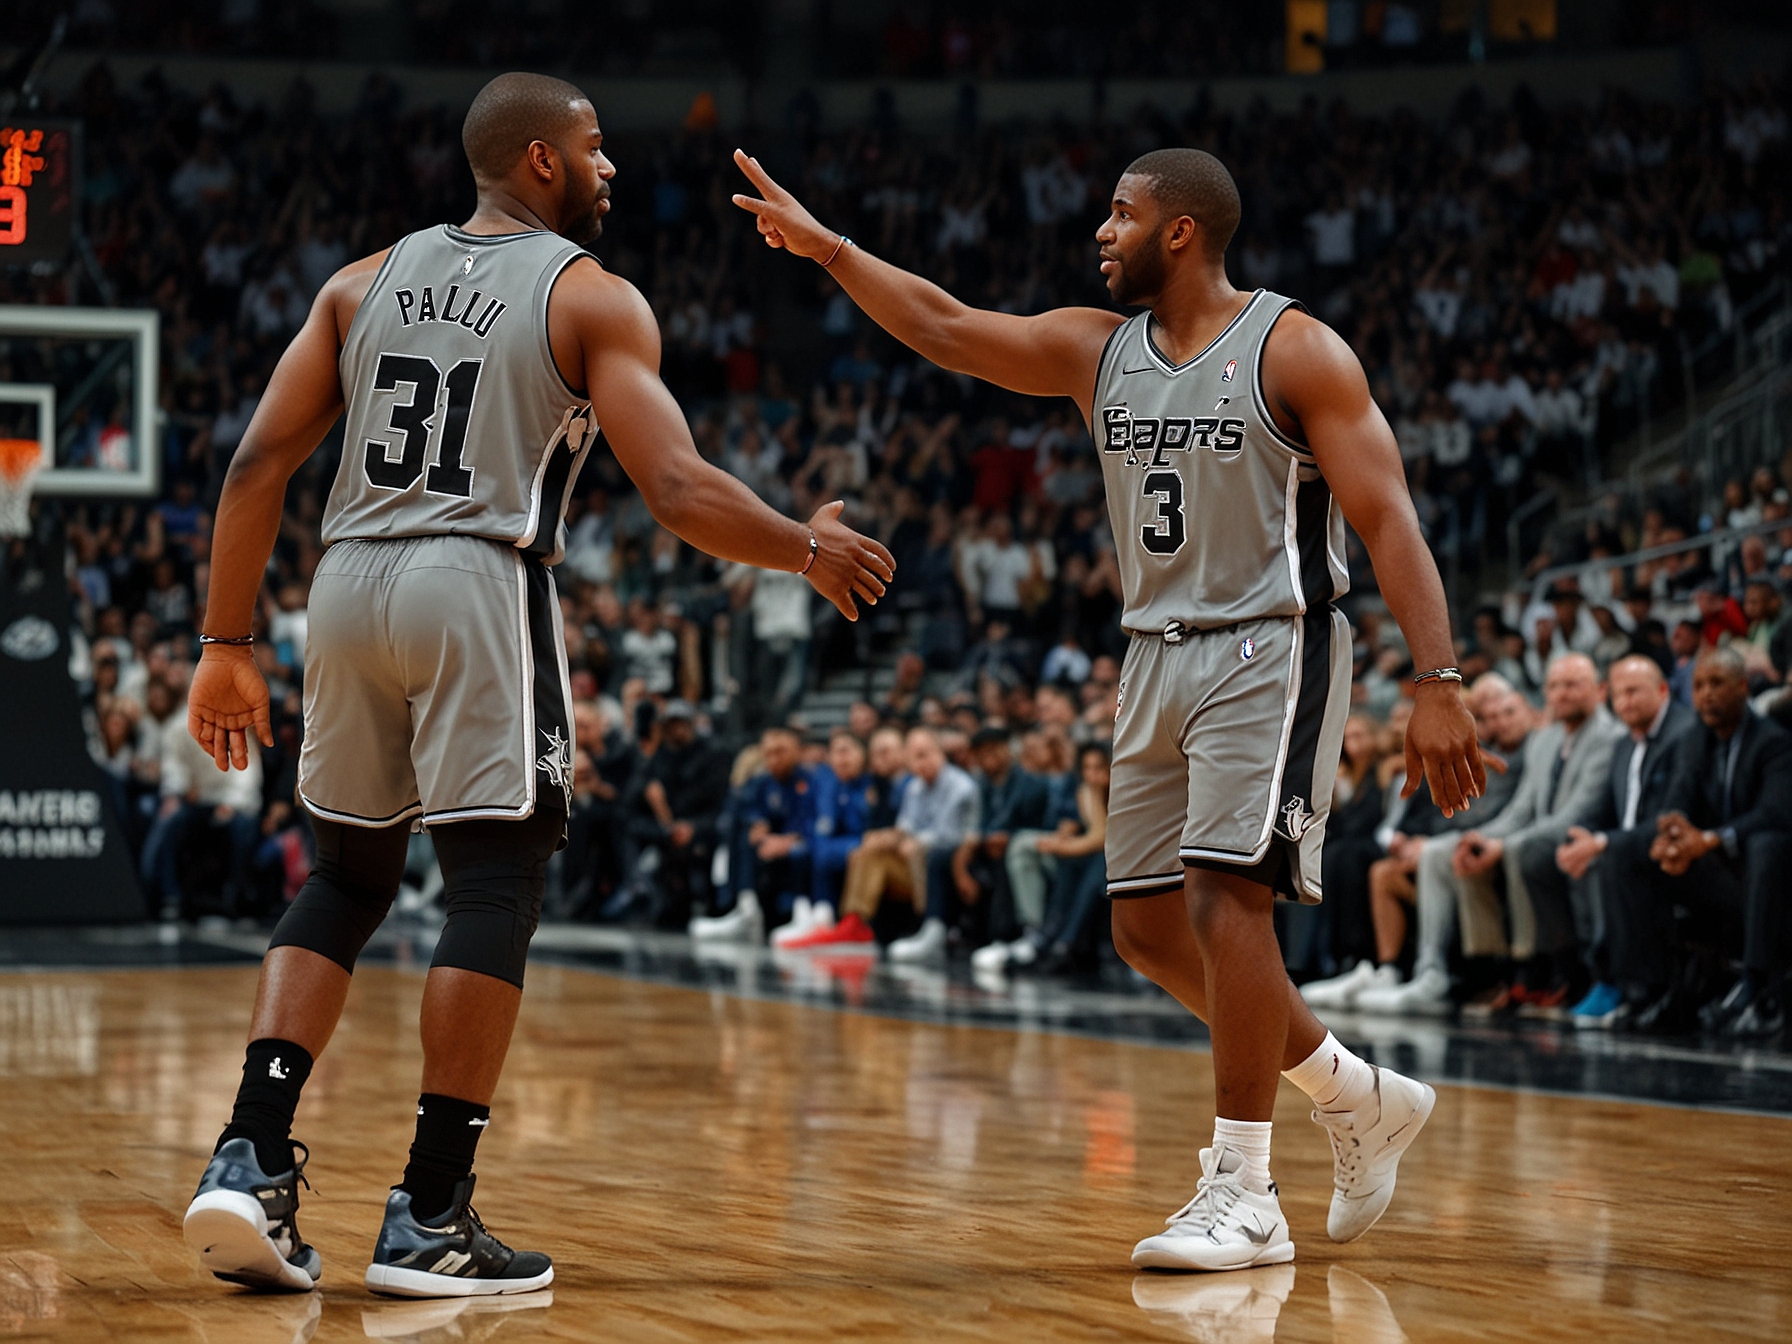 Chris Paul and Victor Wembanyama high-fiving on the court during a game, showcasing their budding partnership and Paul's mentorship in the Spurs' journey to NBA success.